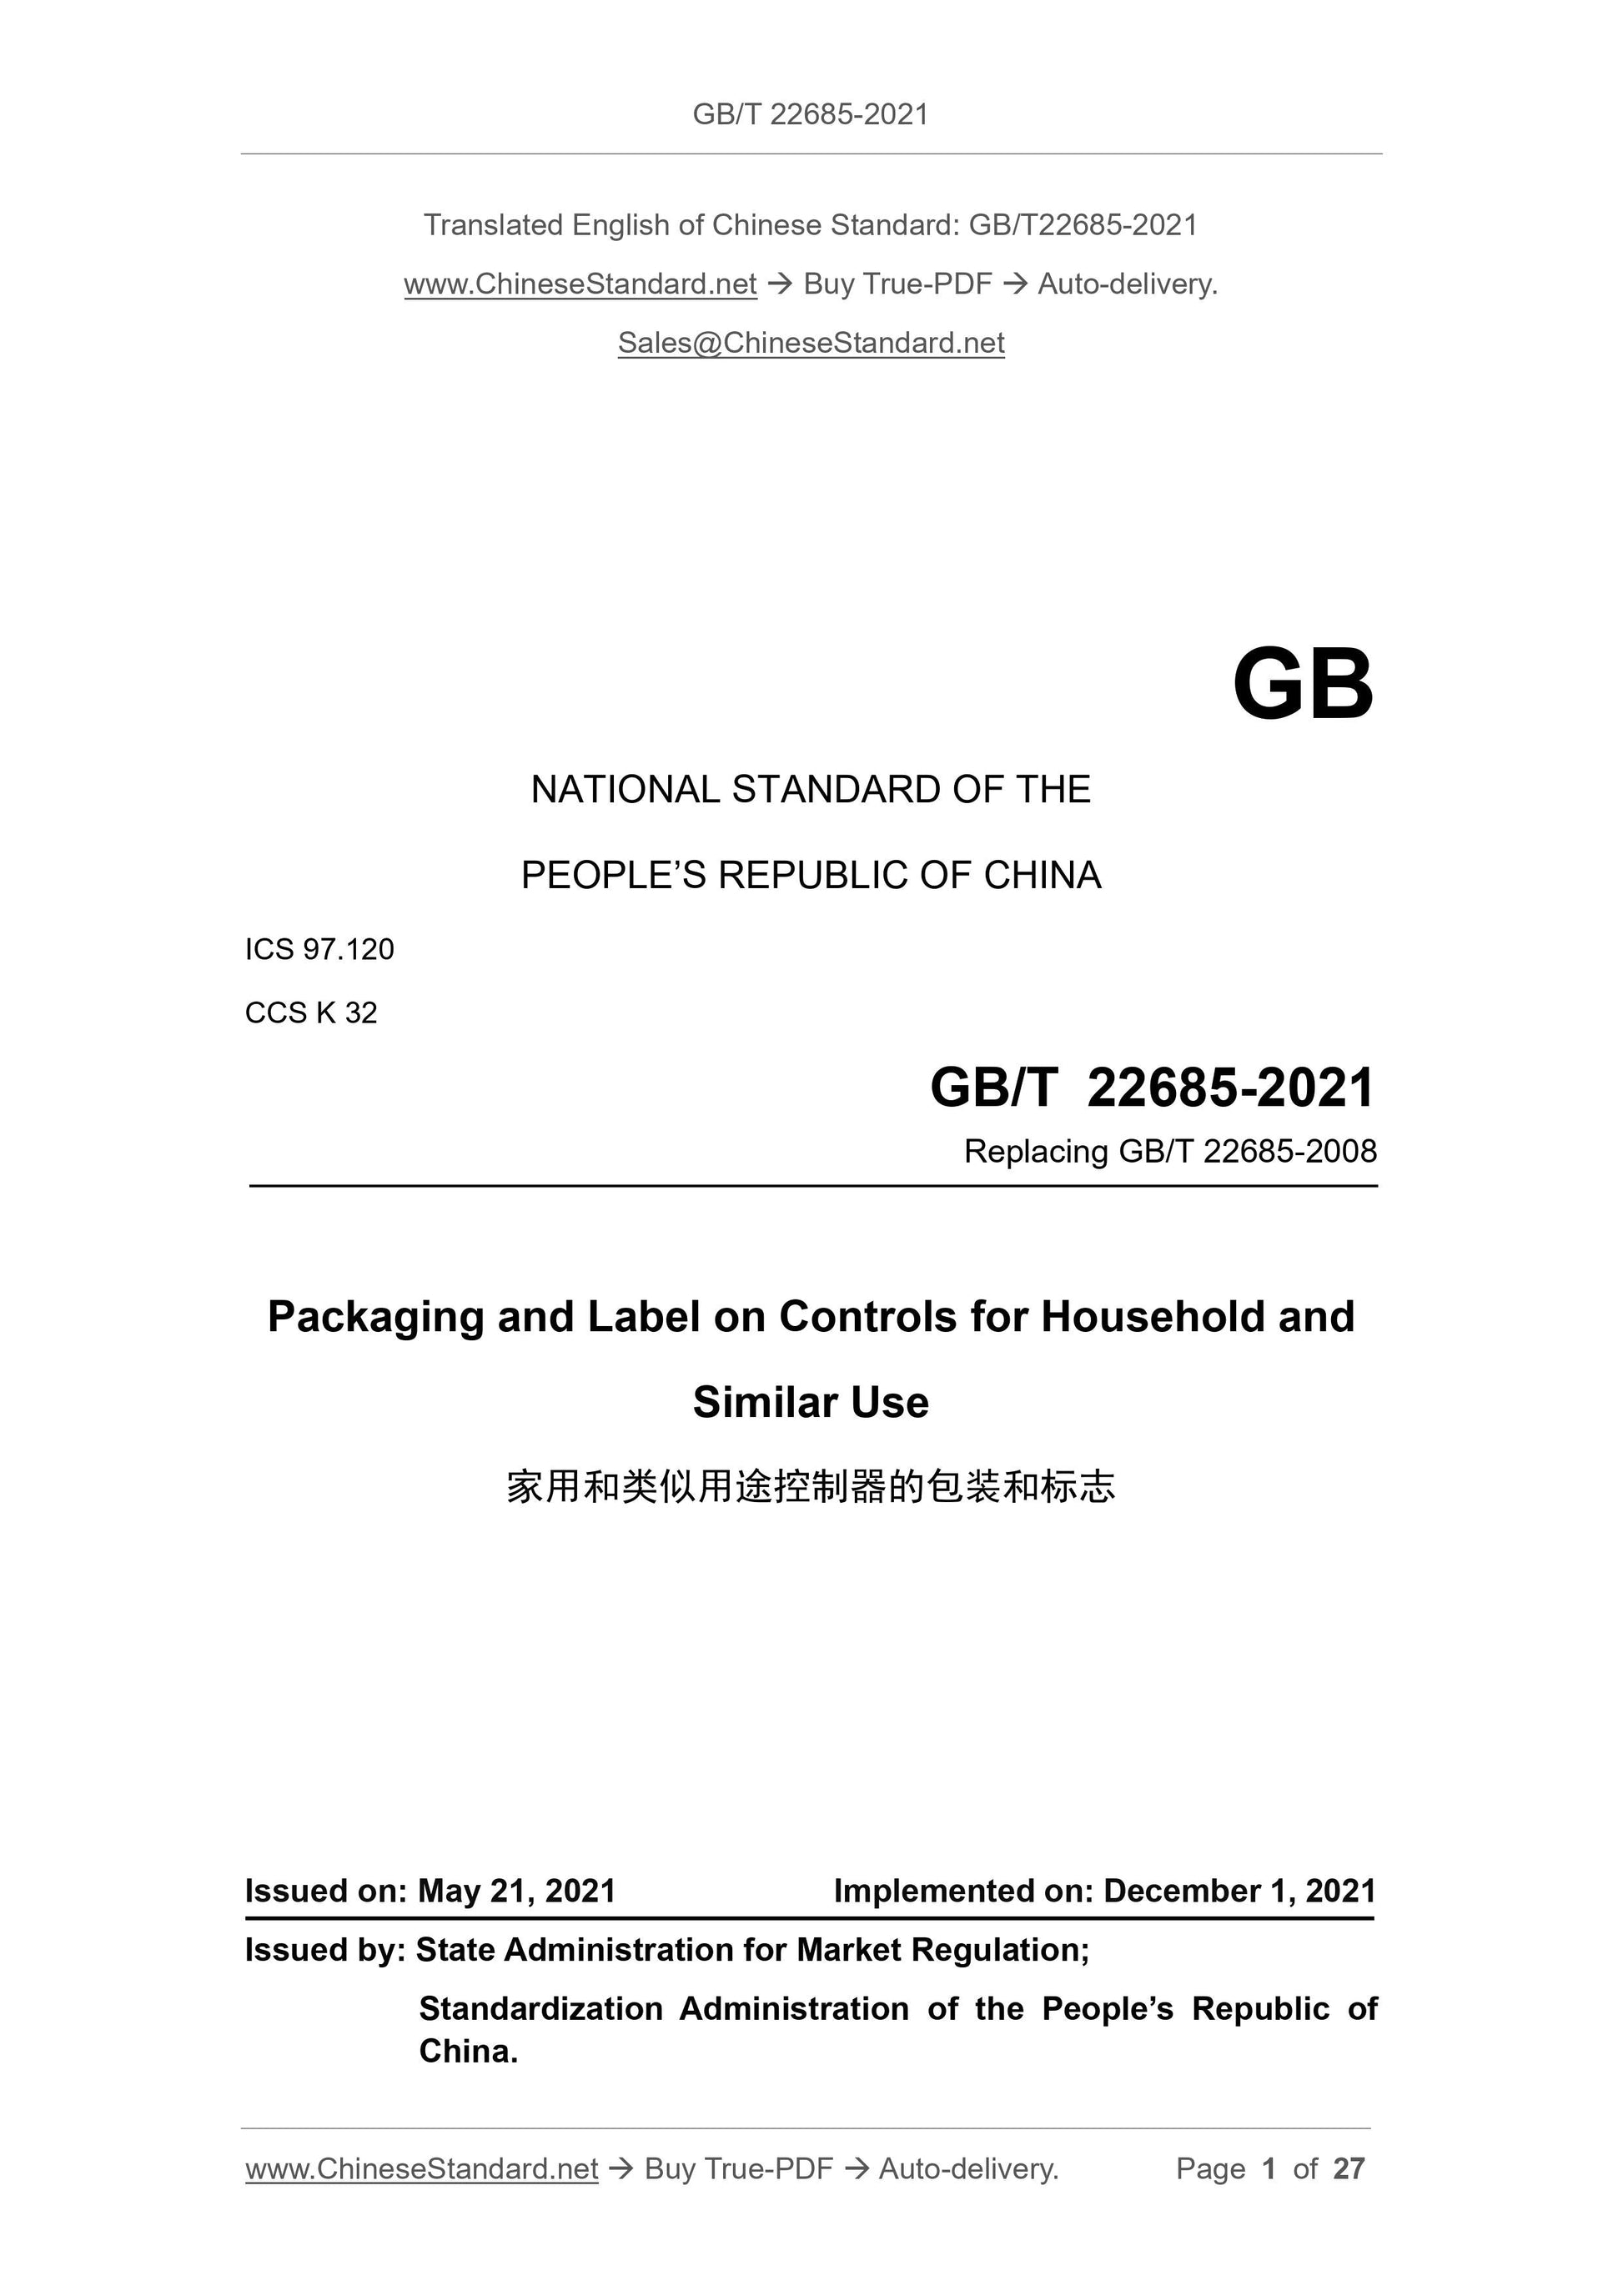 GB/T 22685-2021 Page 1